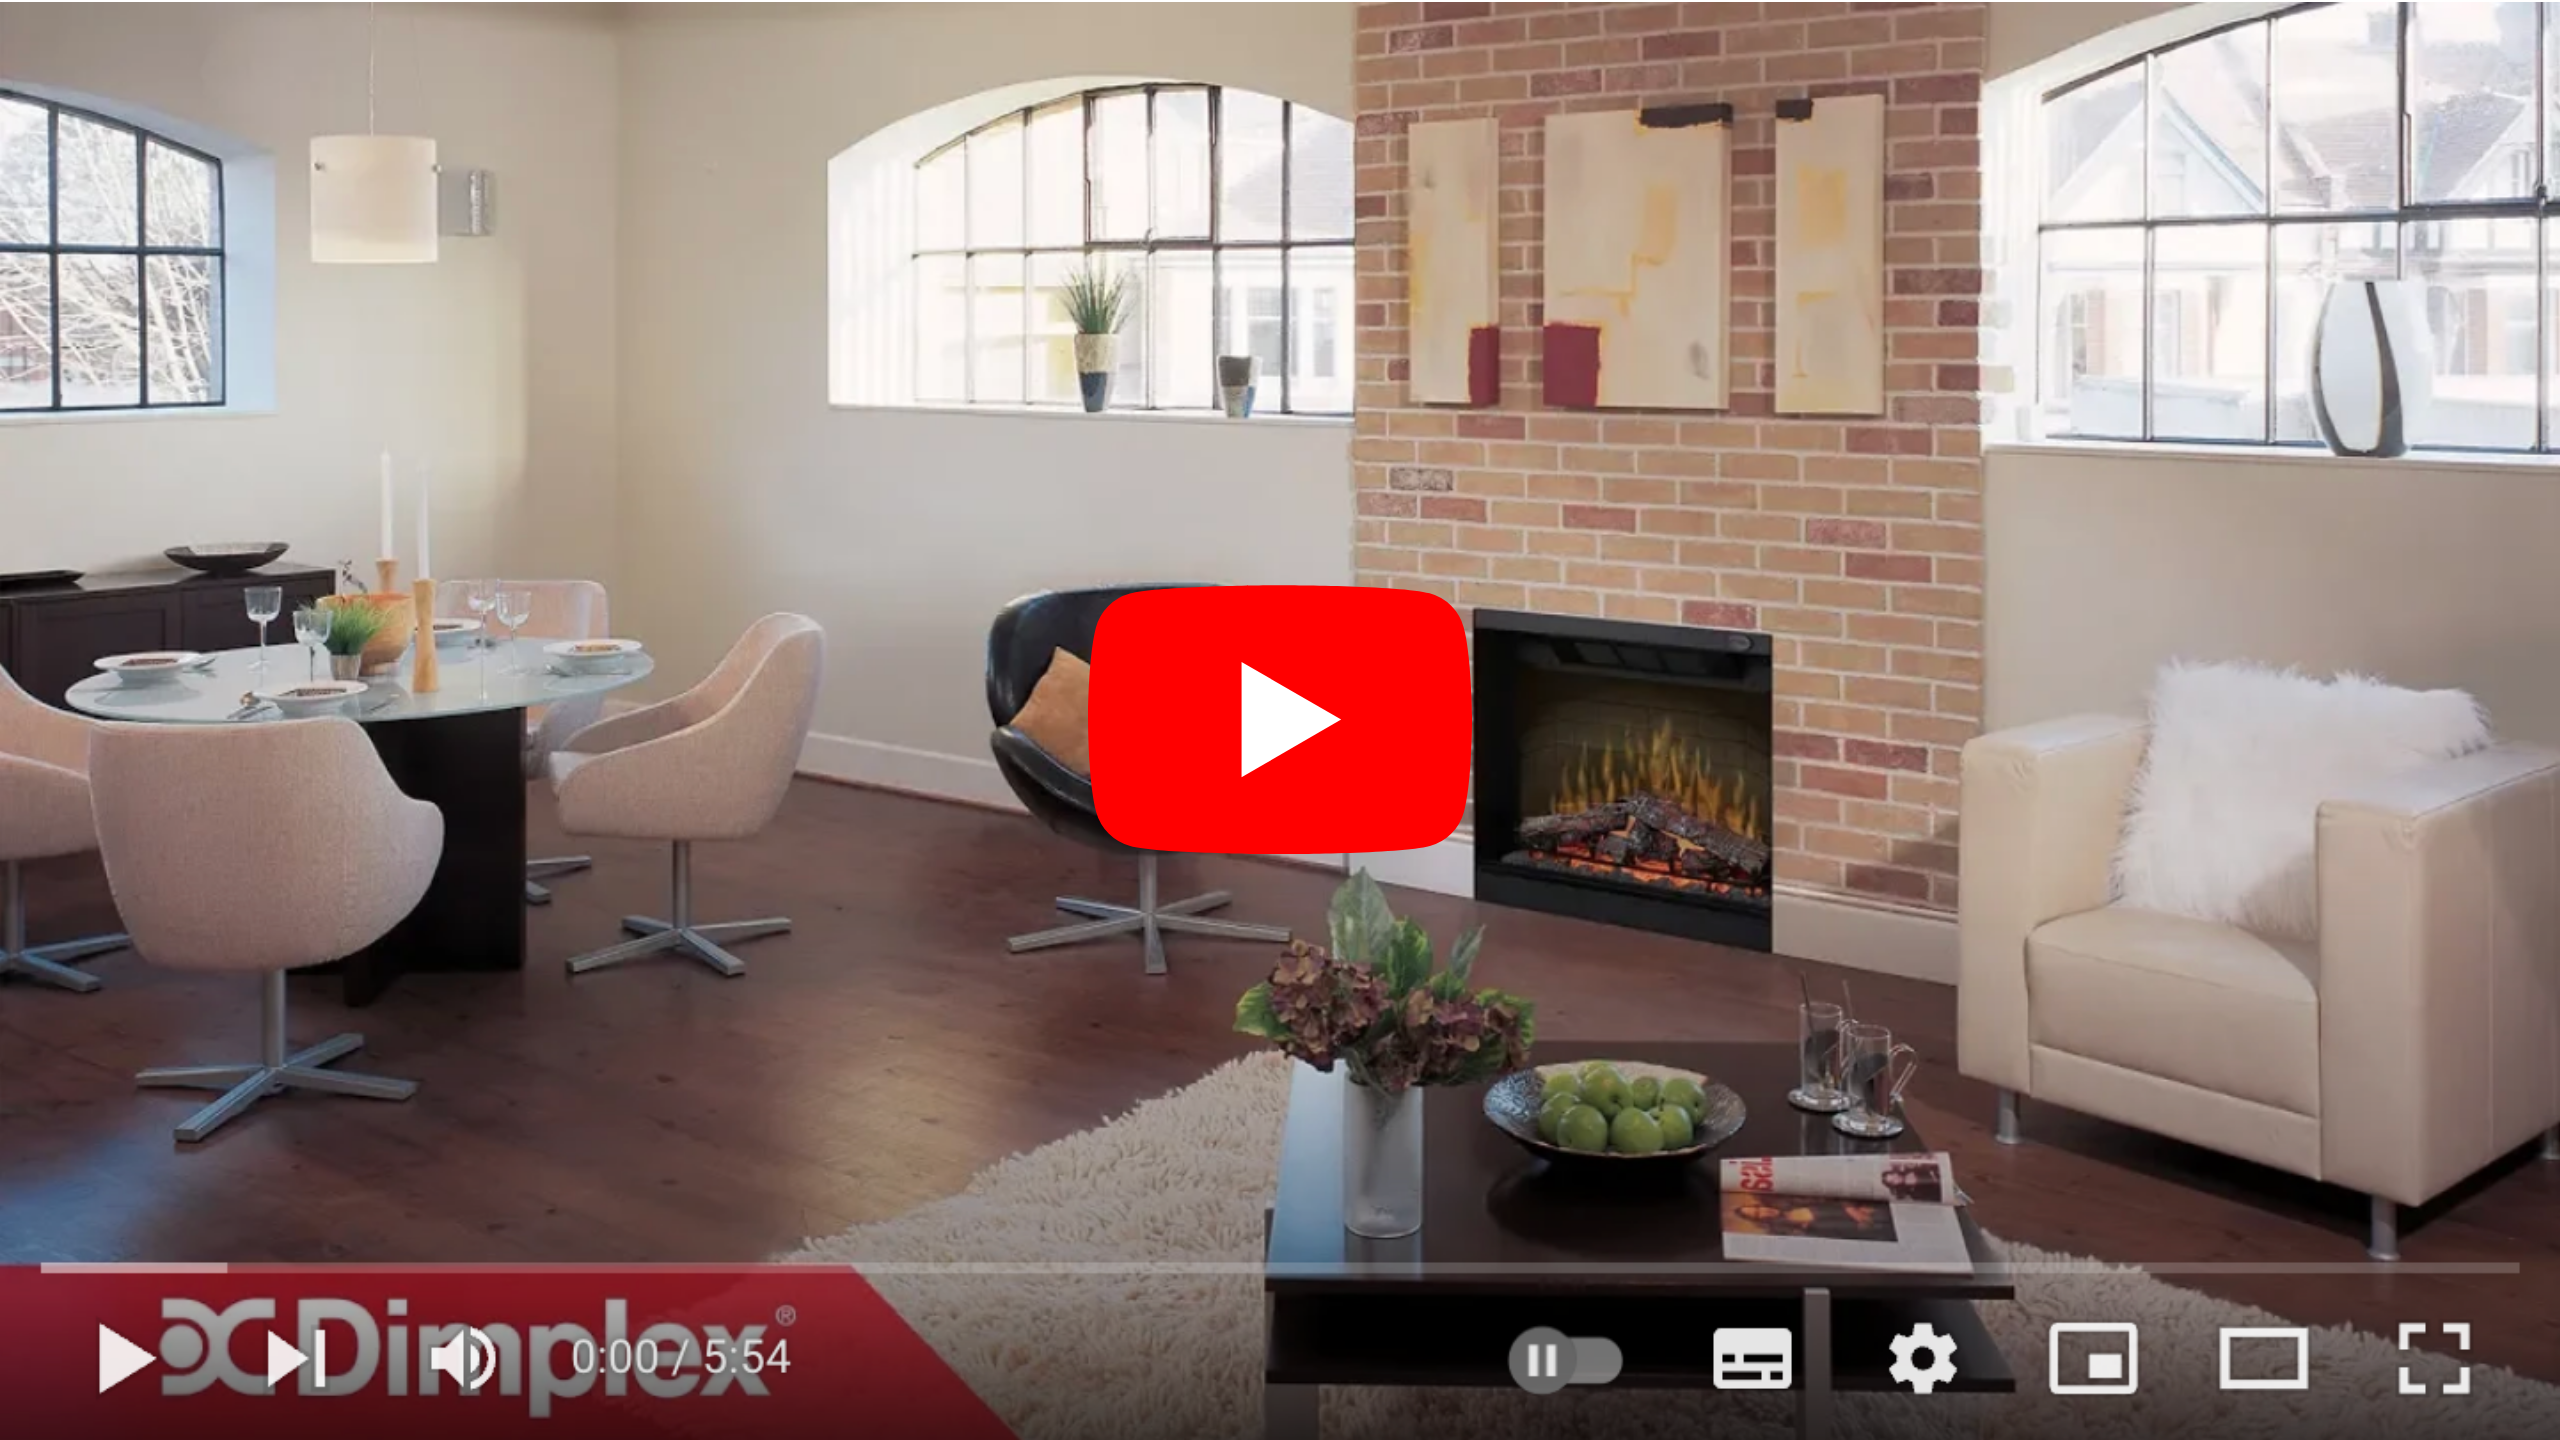 YouTube video of Multi-Fire XD electric fireplace